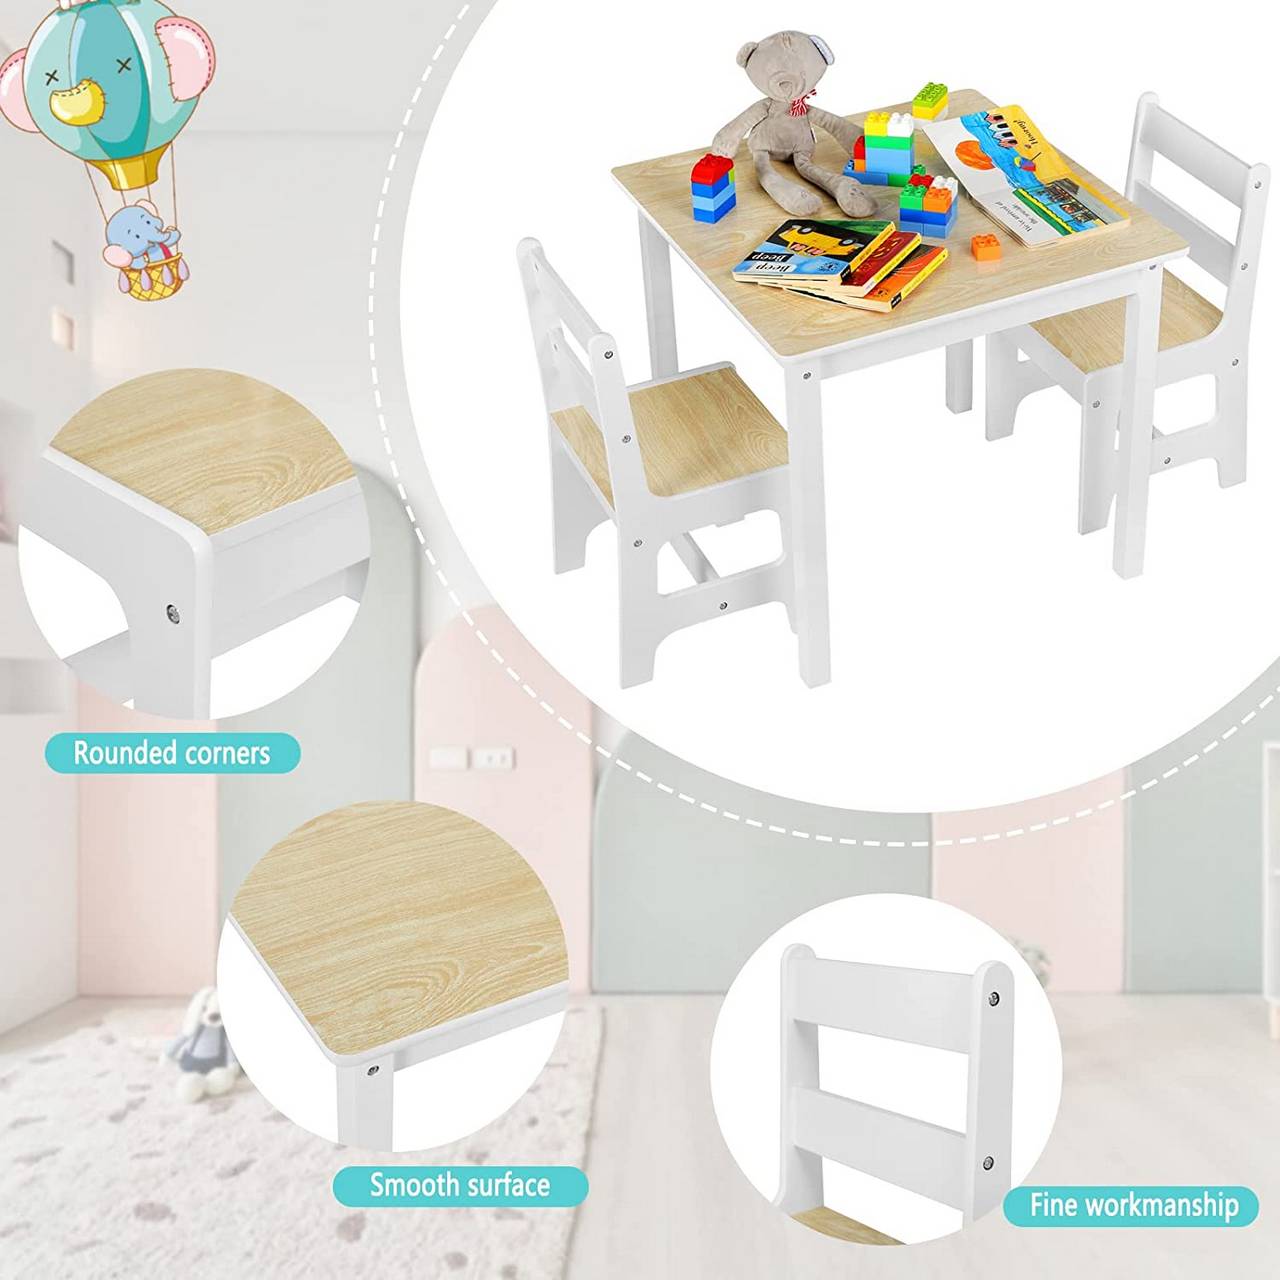 Boys Kids Wooden and Children\'s Chairs Sets Chairs and Desk Set for with Stools Preschoolers White Table 2 Table Girls